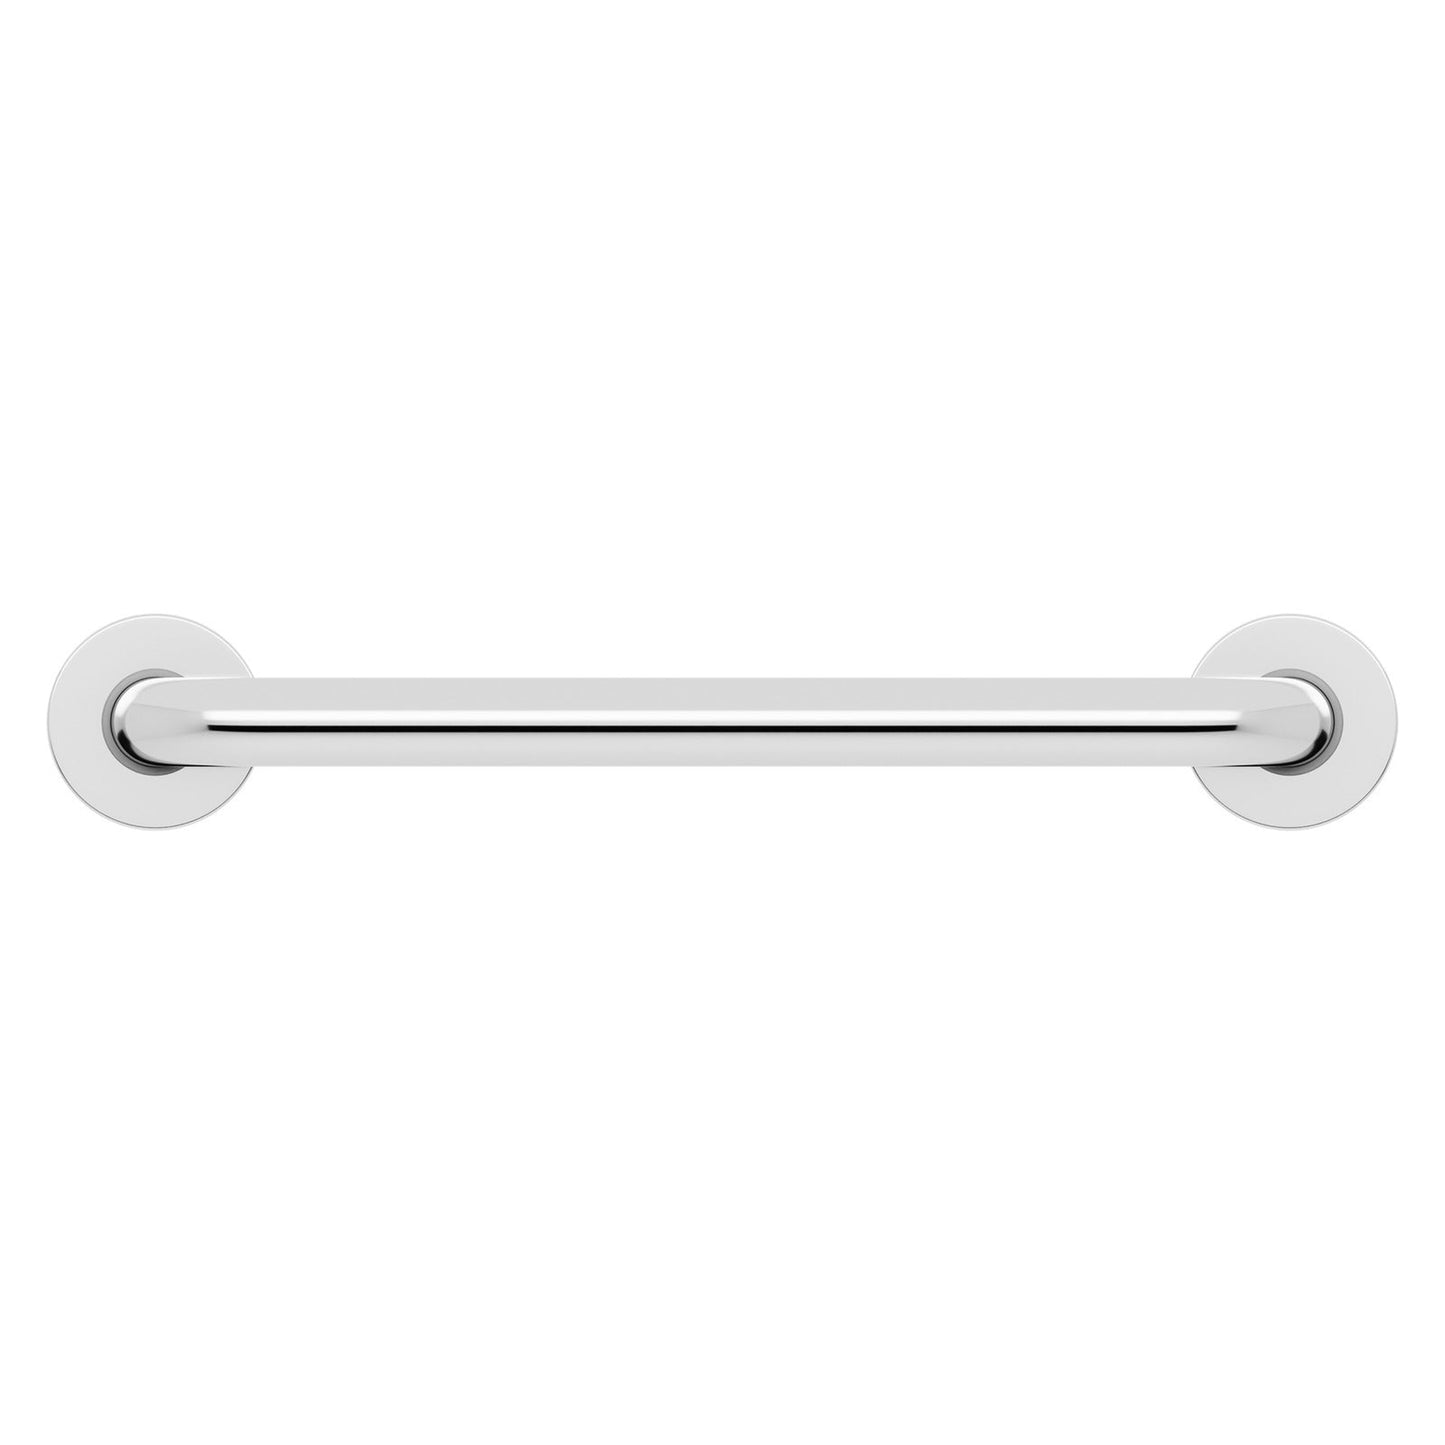 Evekare 16" x 1.25" Polished Stainless Steel Concealed Mount Grab Bar